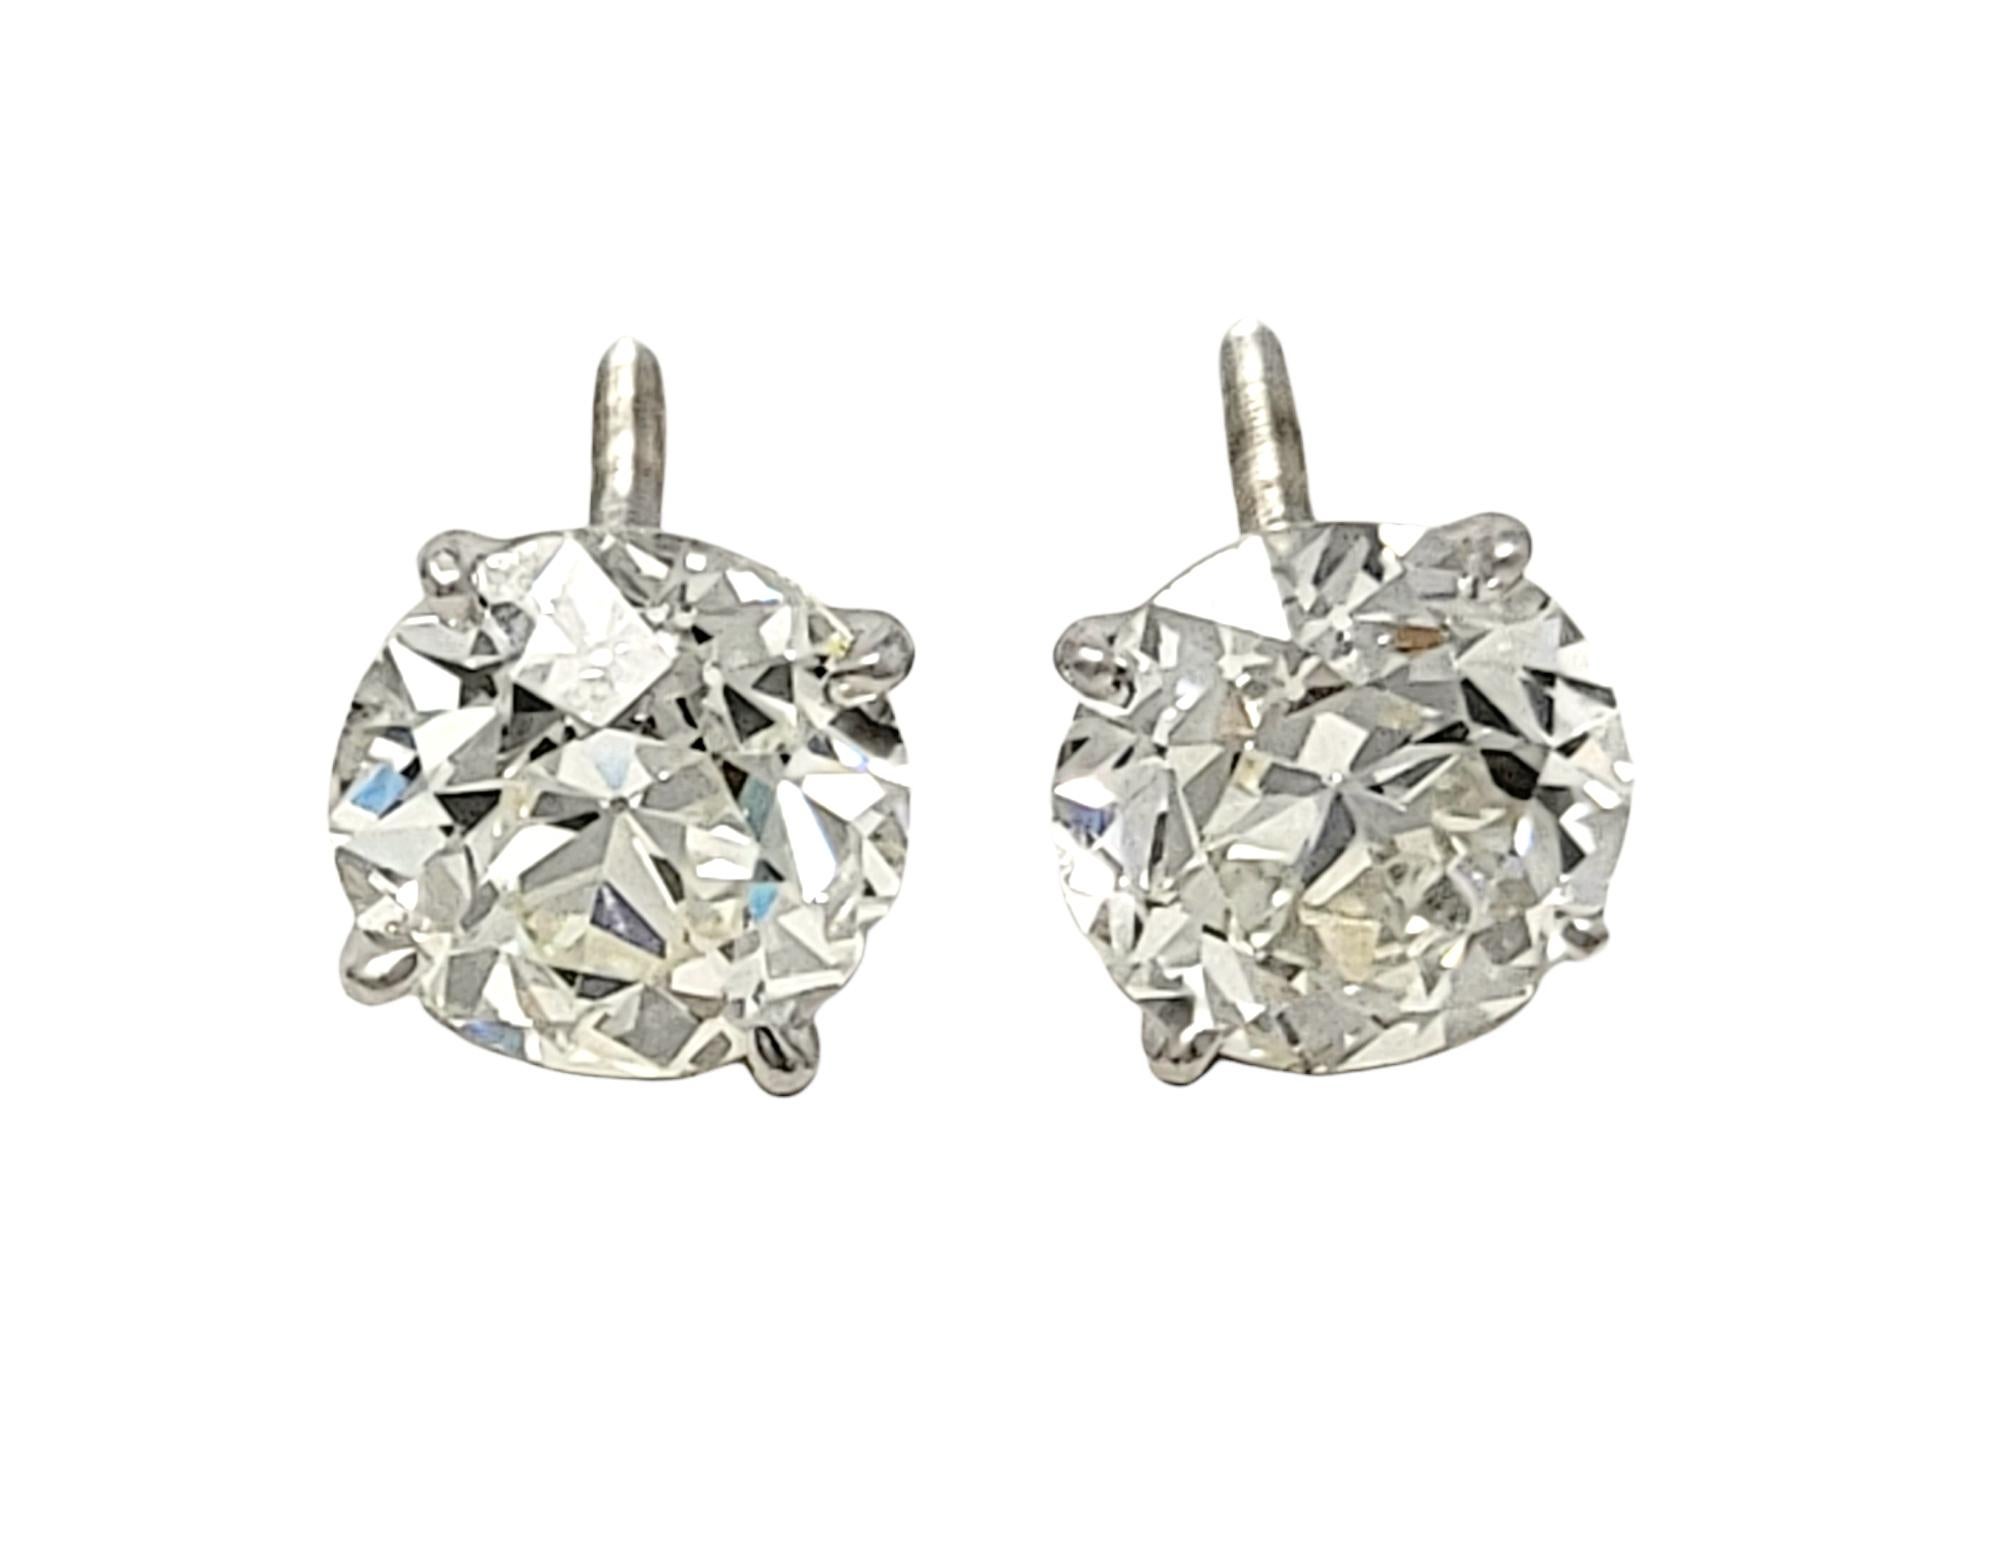 These incredibly gorgeous diamond solitaire stud earrings will absolutely light up your lobe. The stunning round diamond and white gold pierced ear studs are the epitome of minimalist elegance. The simple yet elegant design can be worn with just